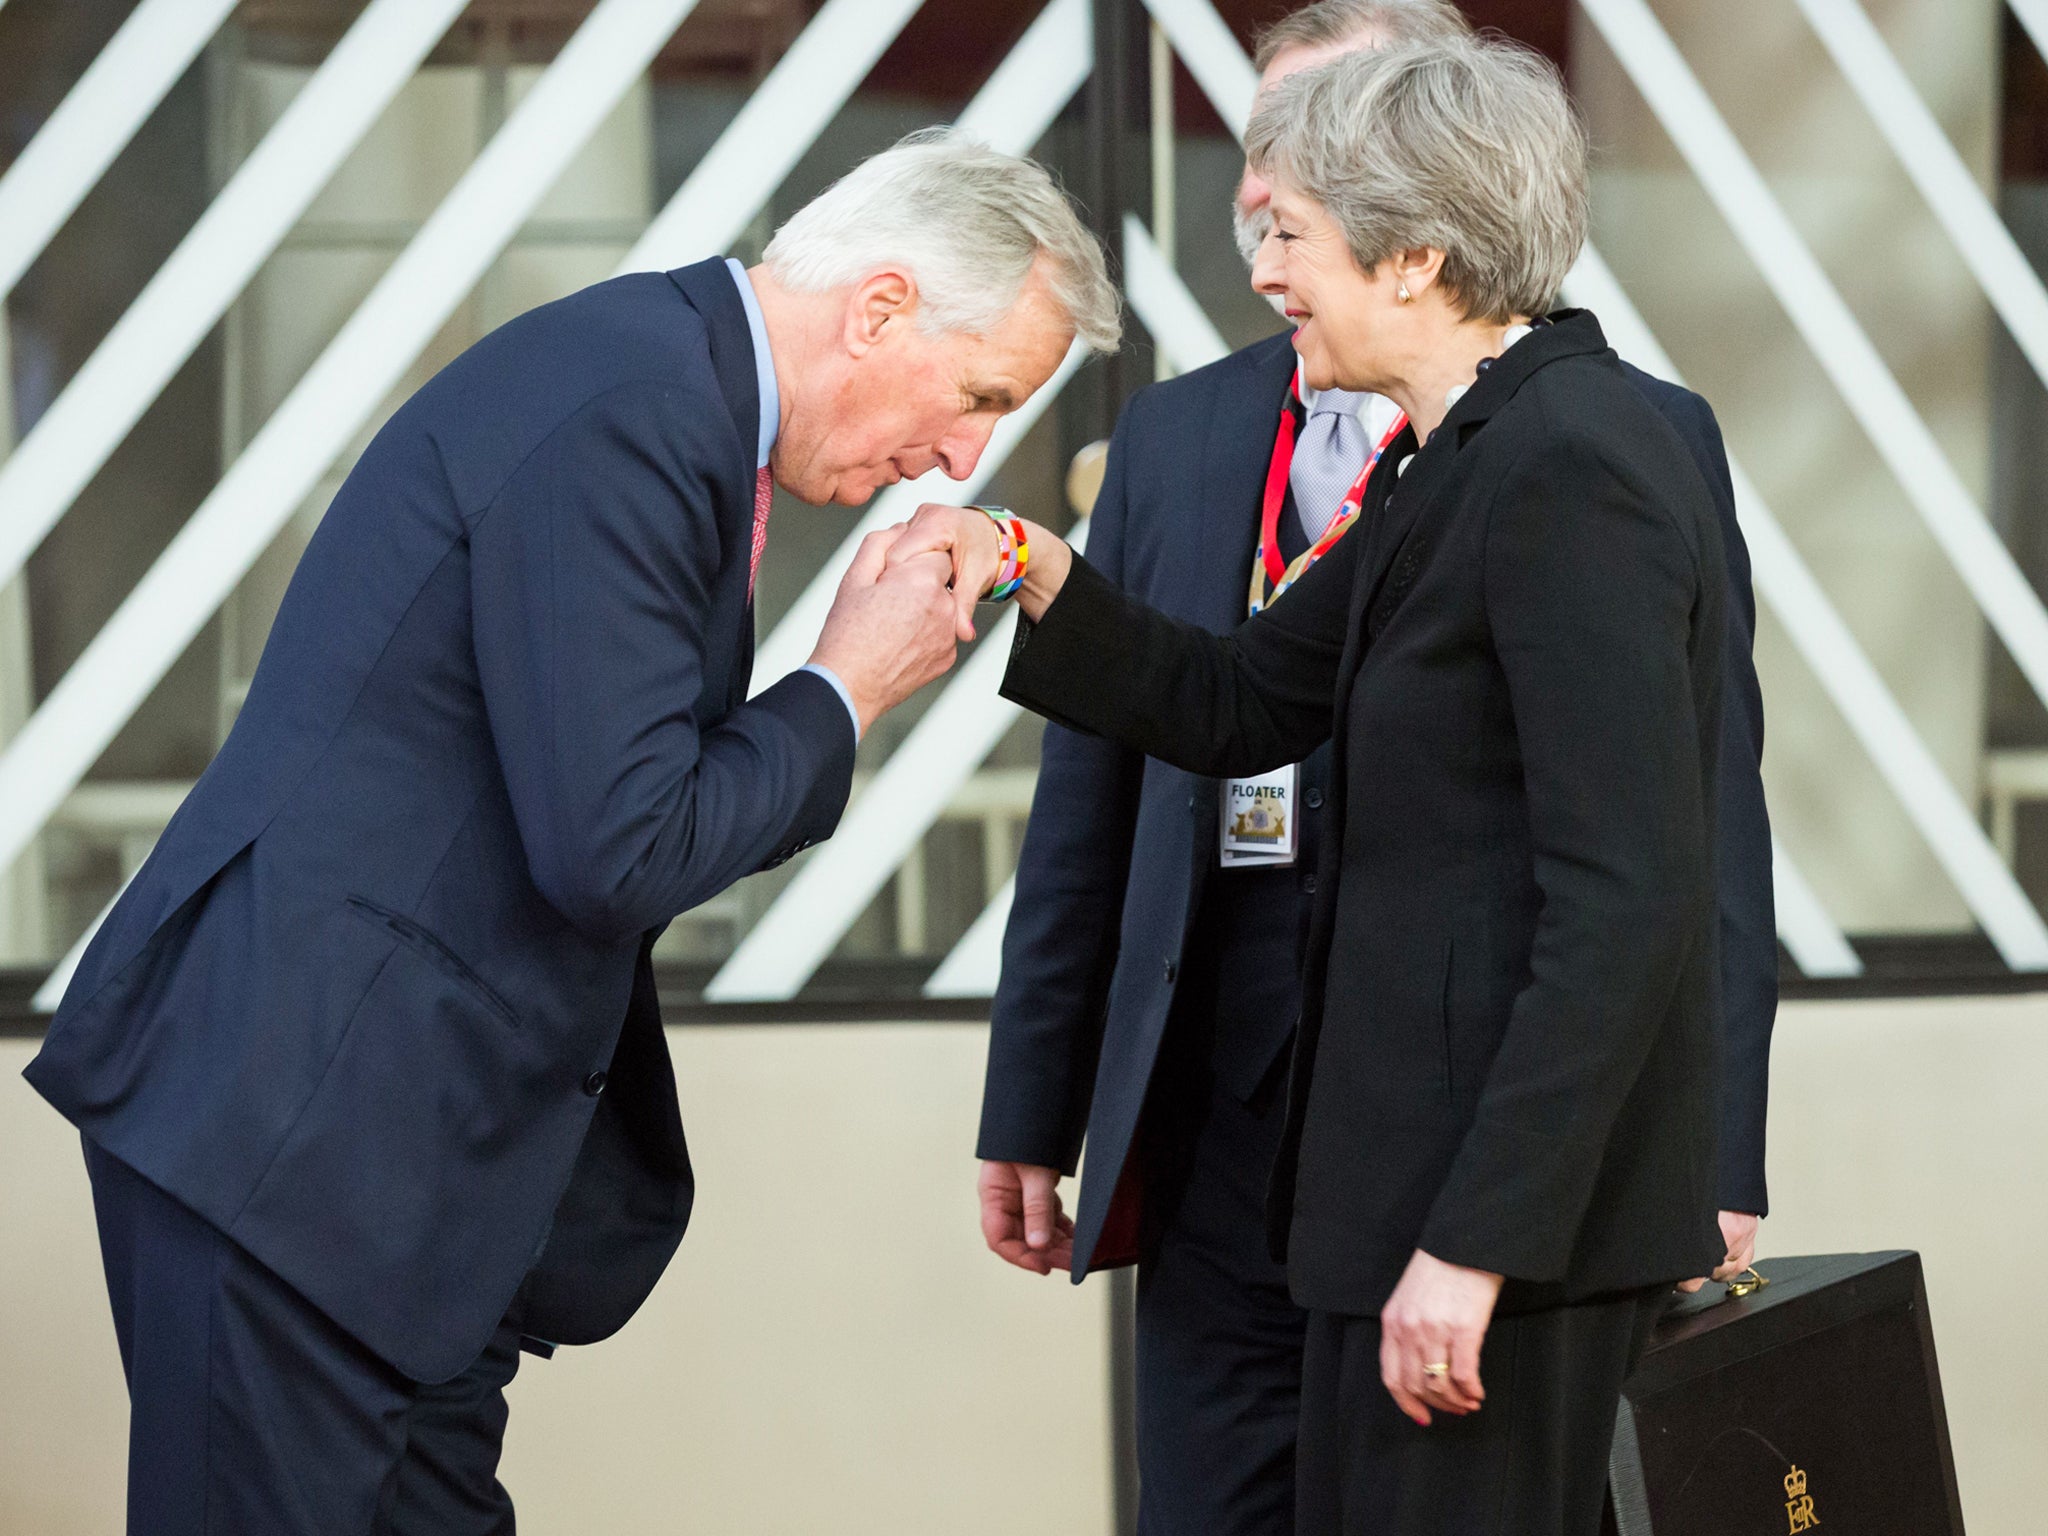 Michel Barnier and Theresa May at the EU Summit. His remarks might mollify the currency, but they can't stop a no-deal Brexit